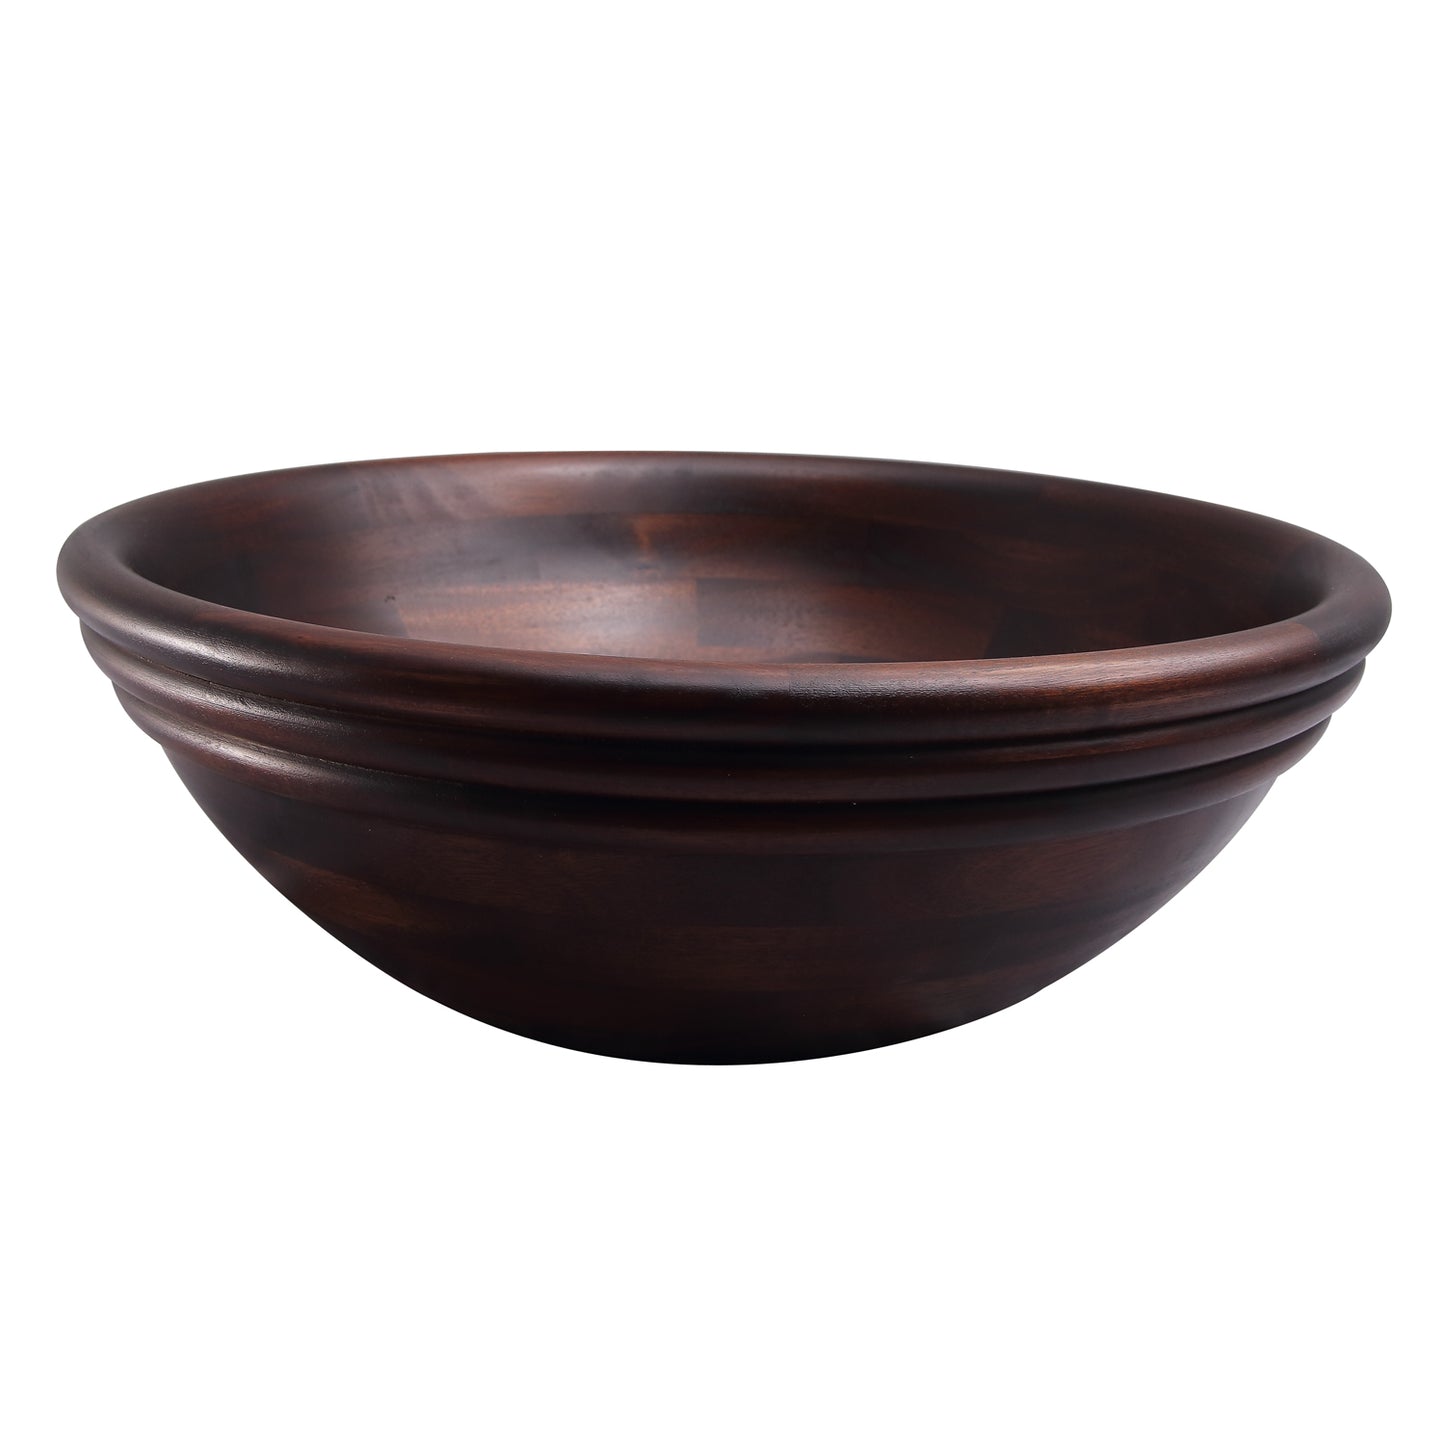 Corcora Mahogany Vessel Sink 17-1/8" Round with Natural  Finish